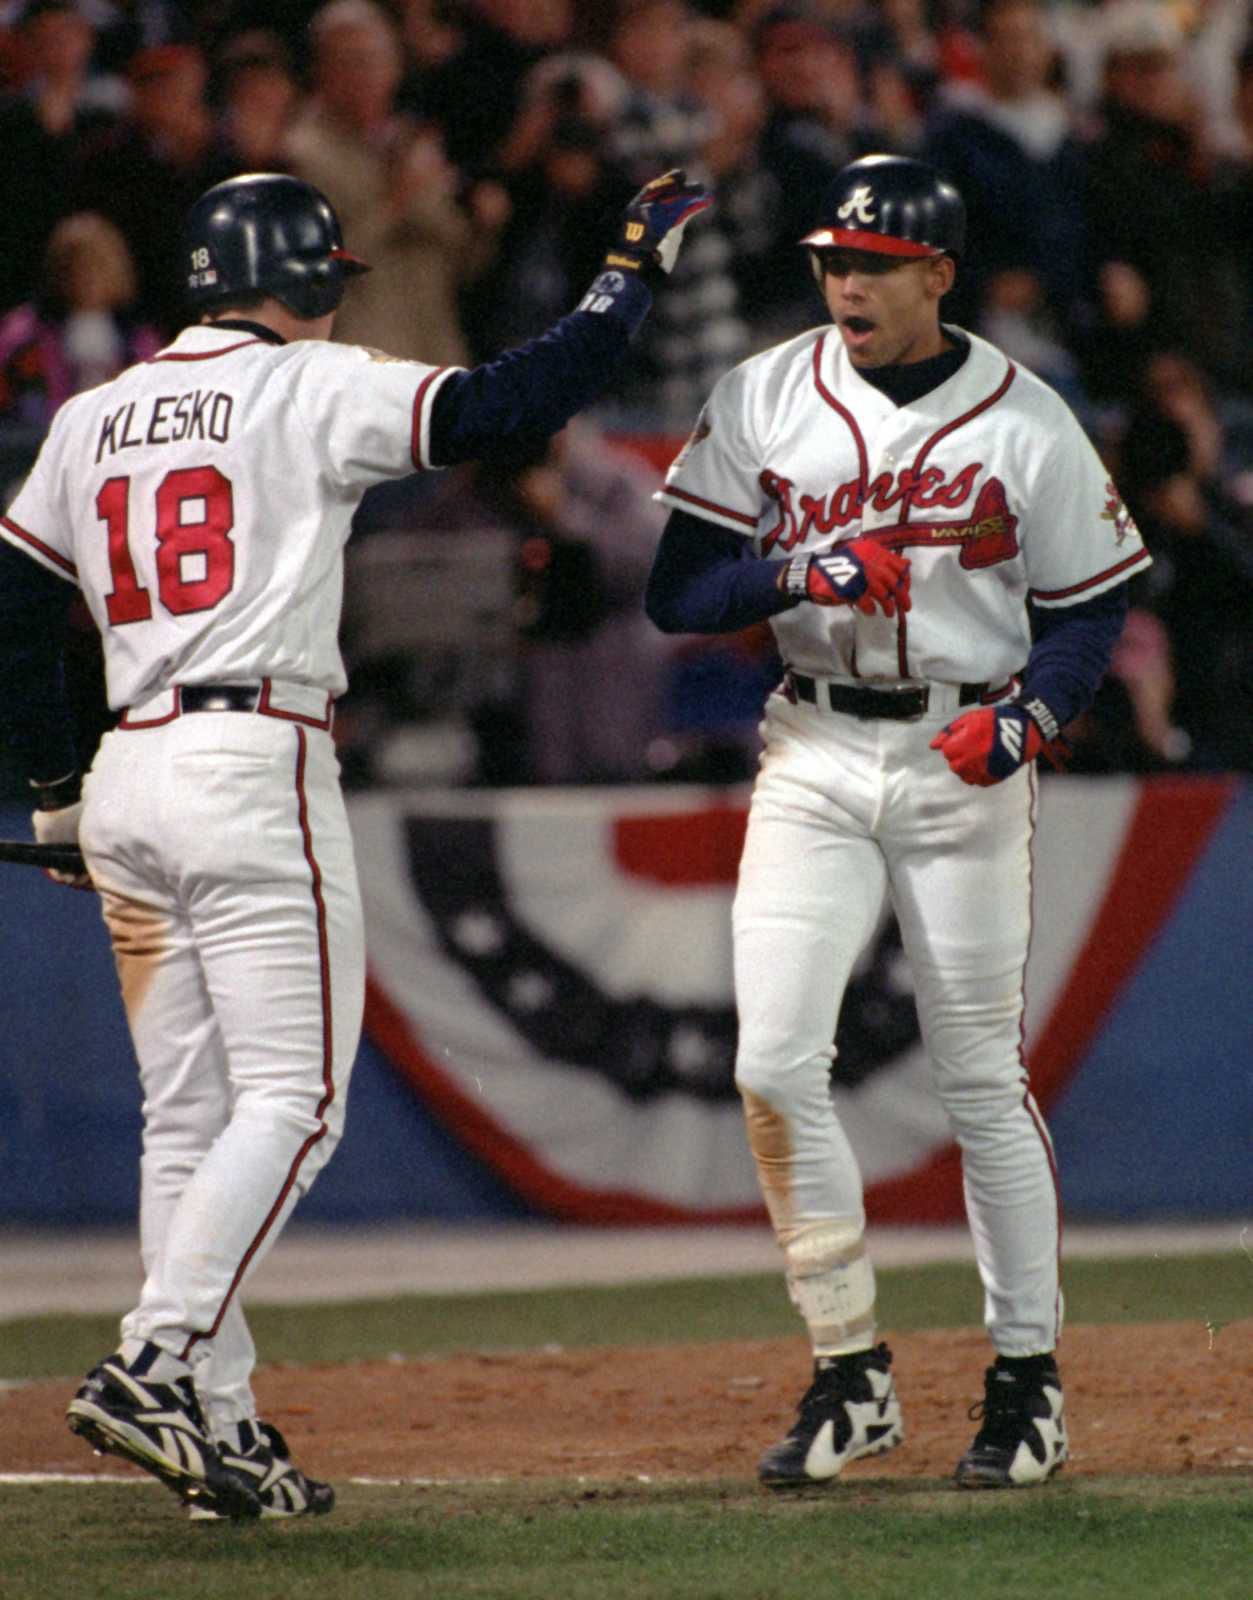 Braves Flashback: David Justice goes from hated to hero in one